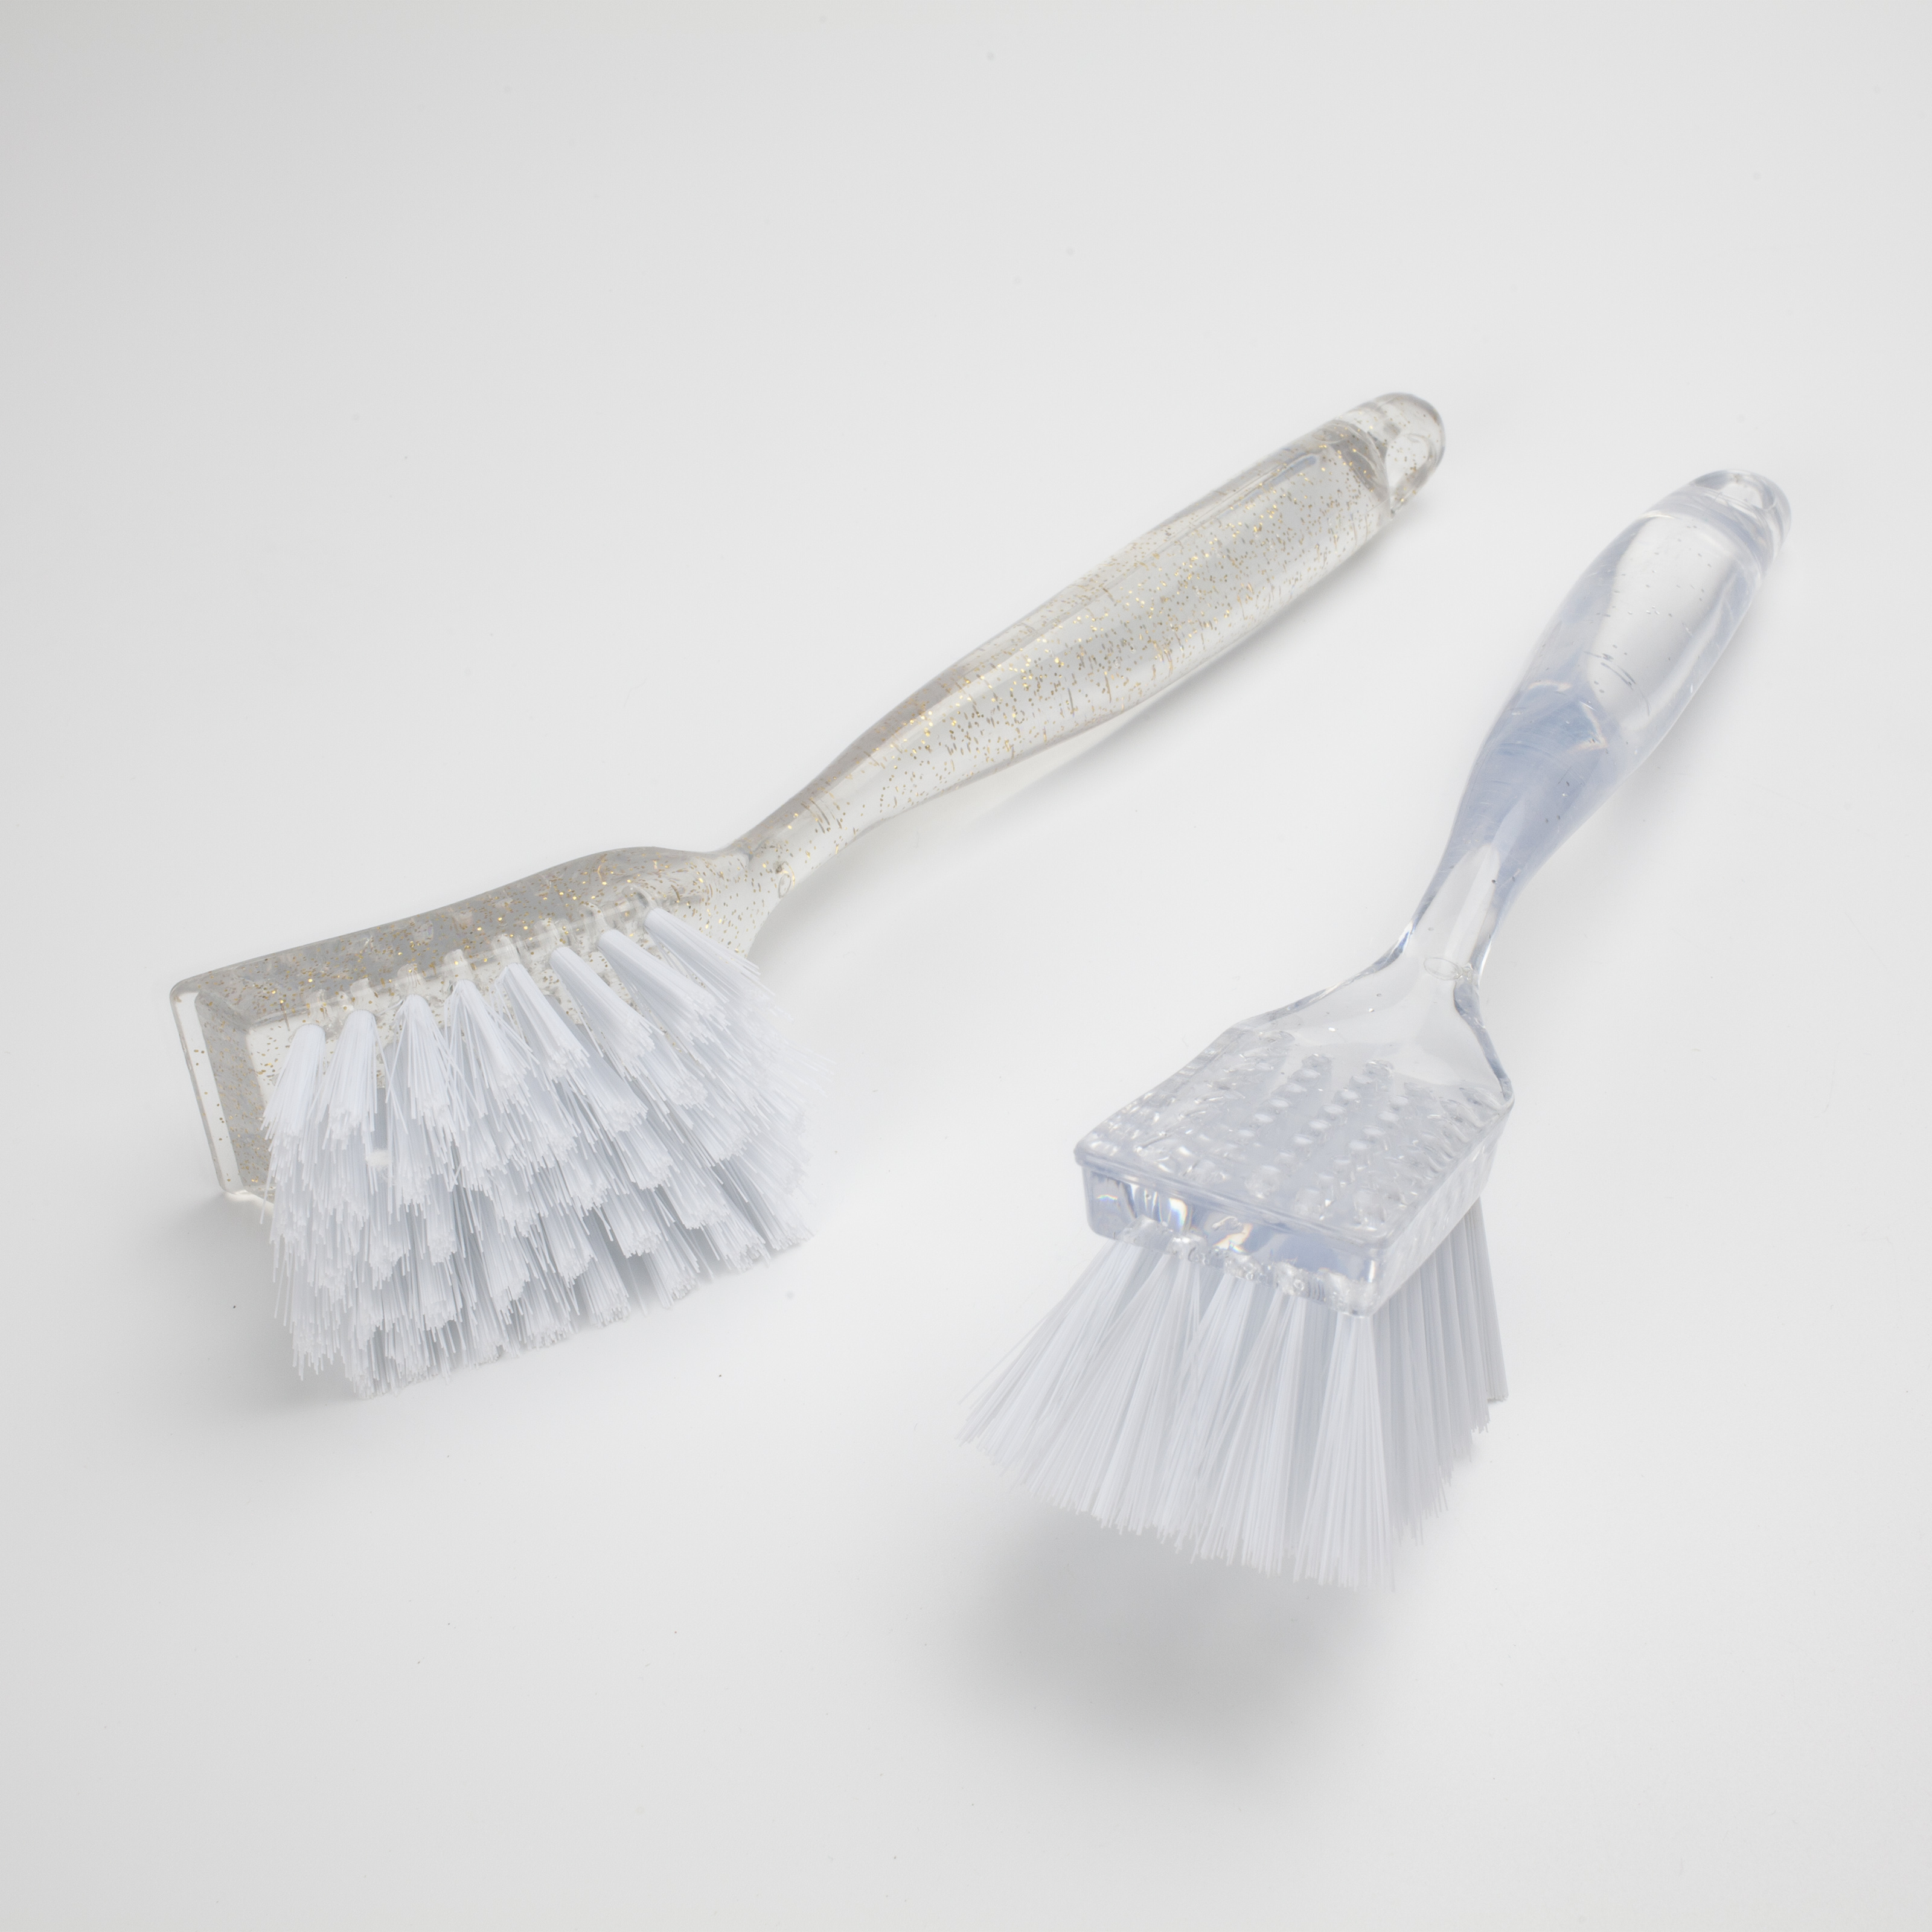 Transparent Dish Cleaning Brush & Kitchen Cleaning Brush